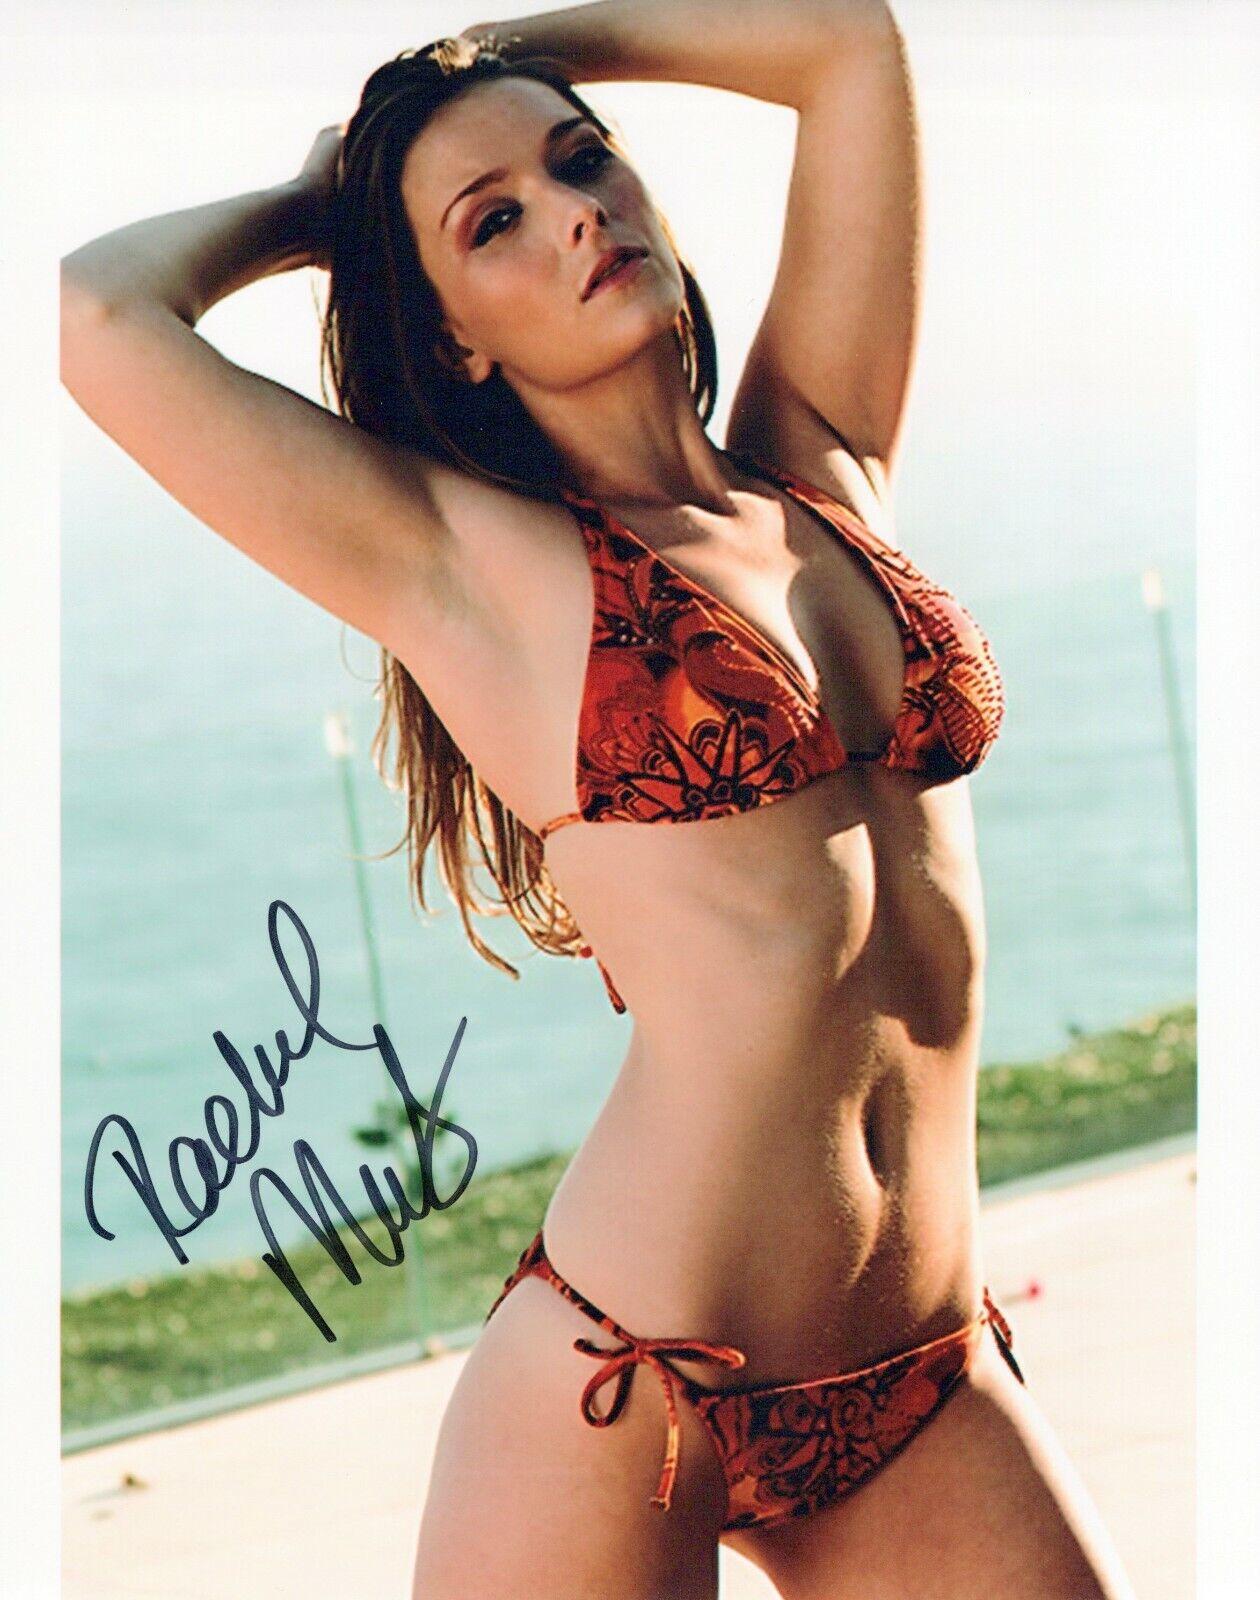 Rachel Mullins glamour shot autographed Photo Poster painting signed 8x10 #10